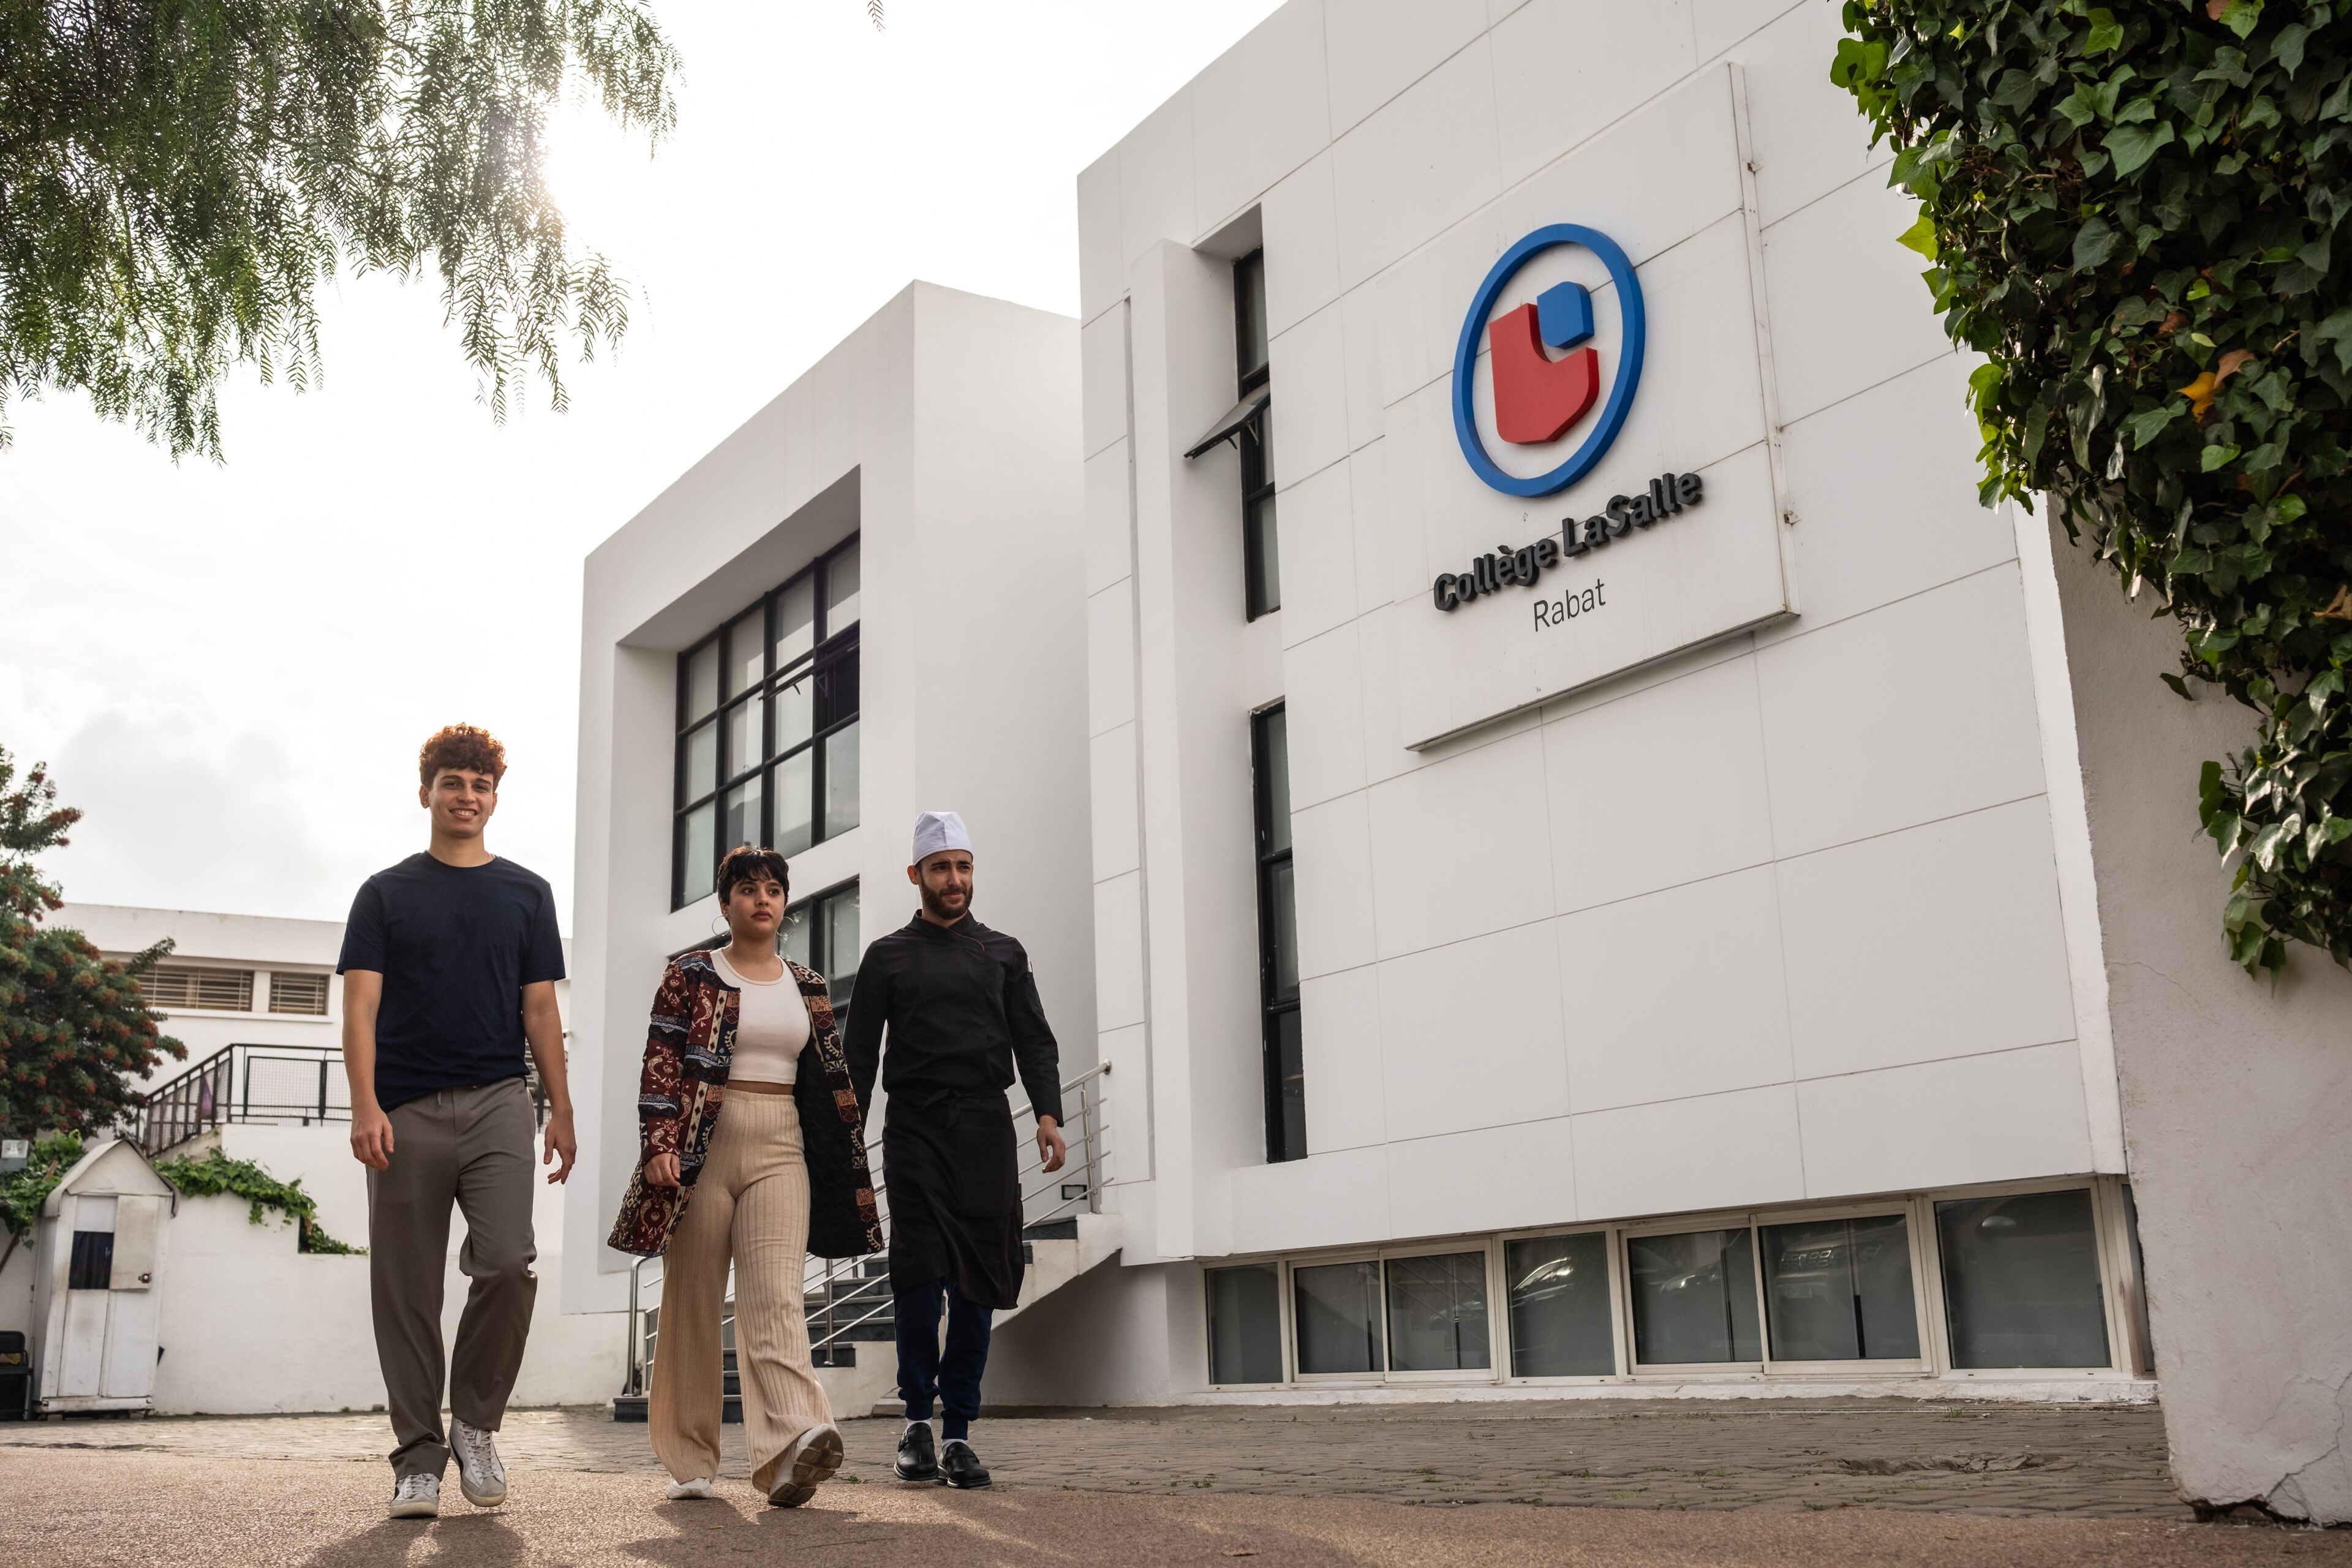 Three students exit Collège La Salle in Rabat, the diverse group reflecting the school's inclusive environment.